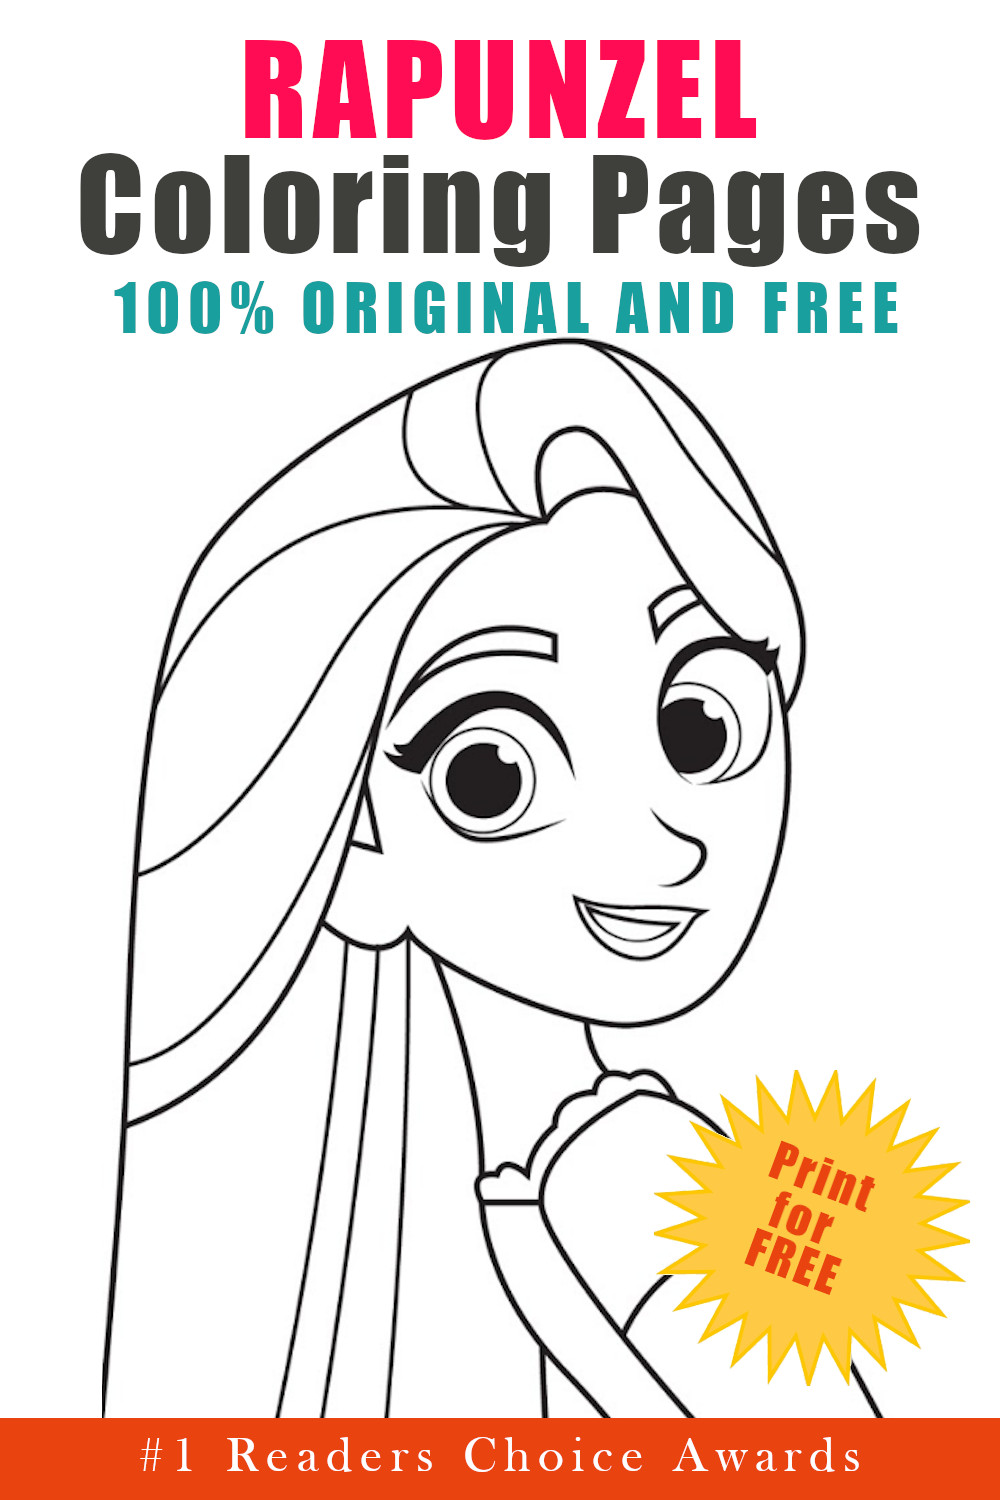 original and free rapunzel coloring pages